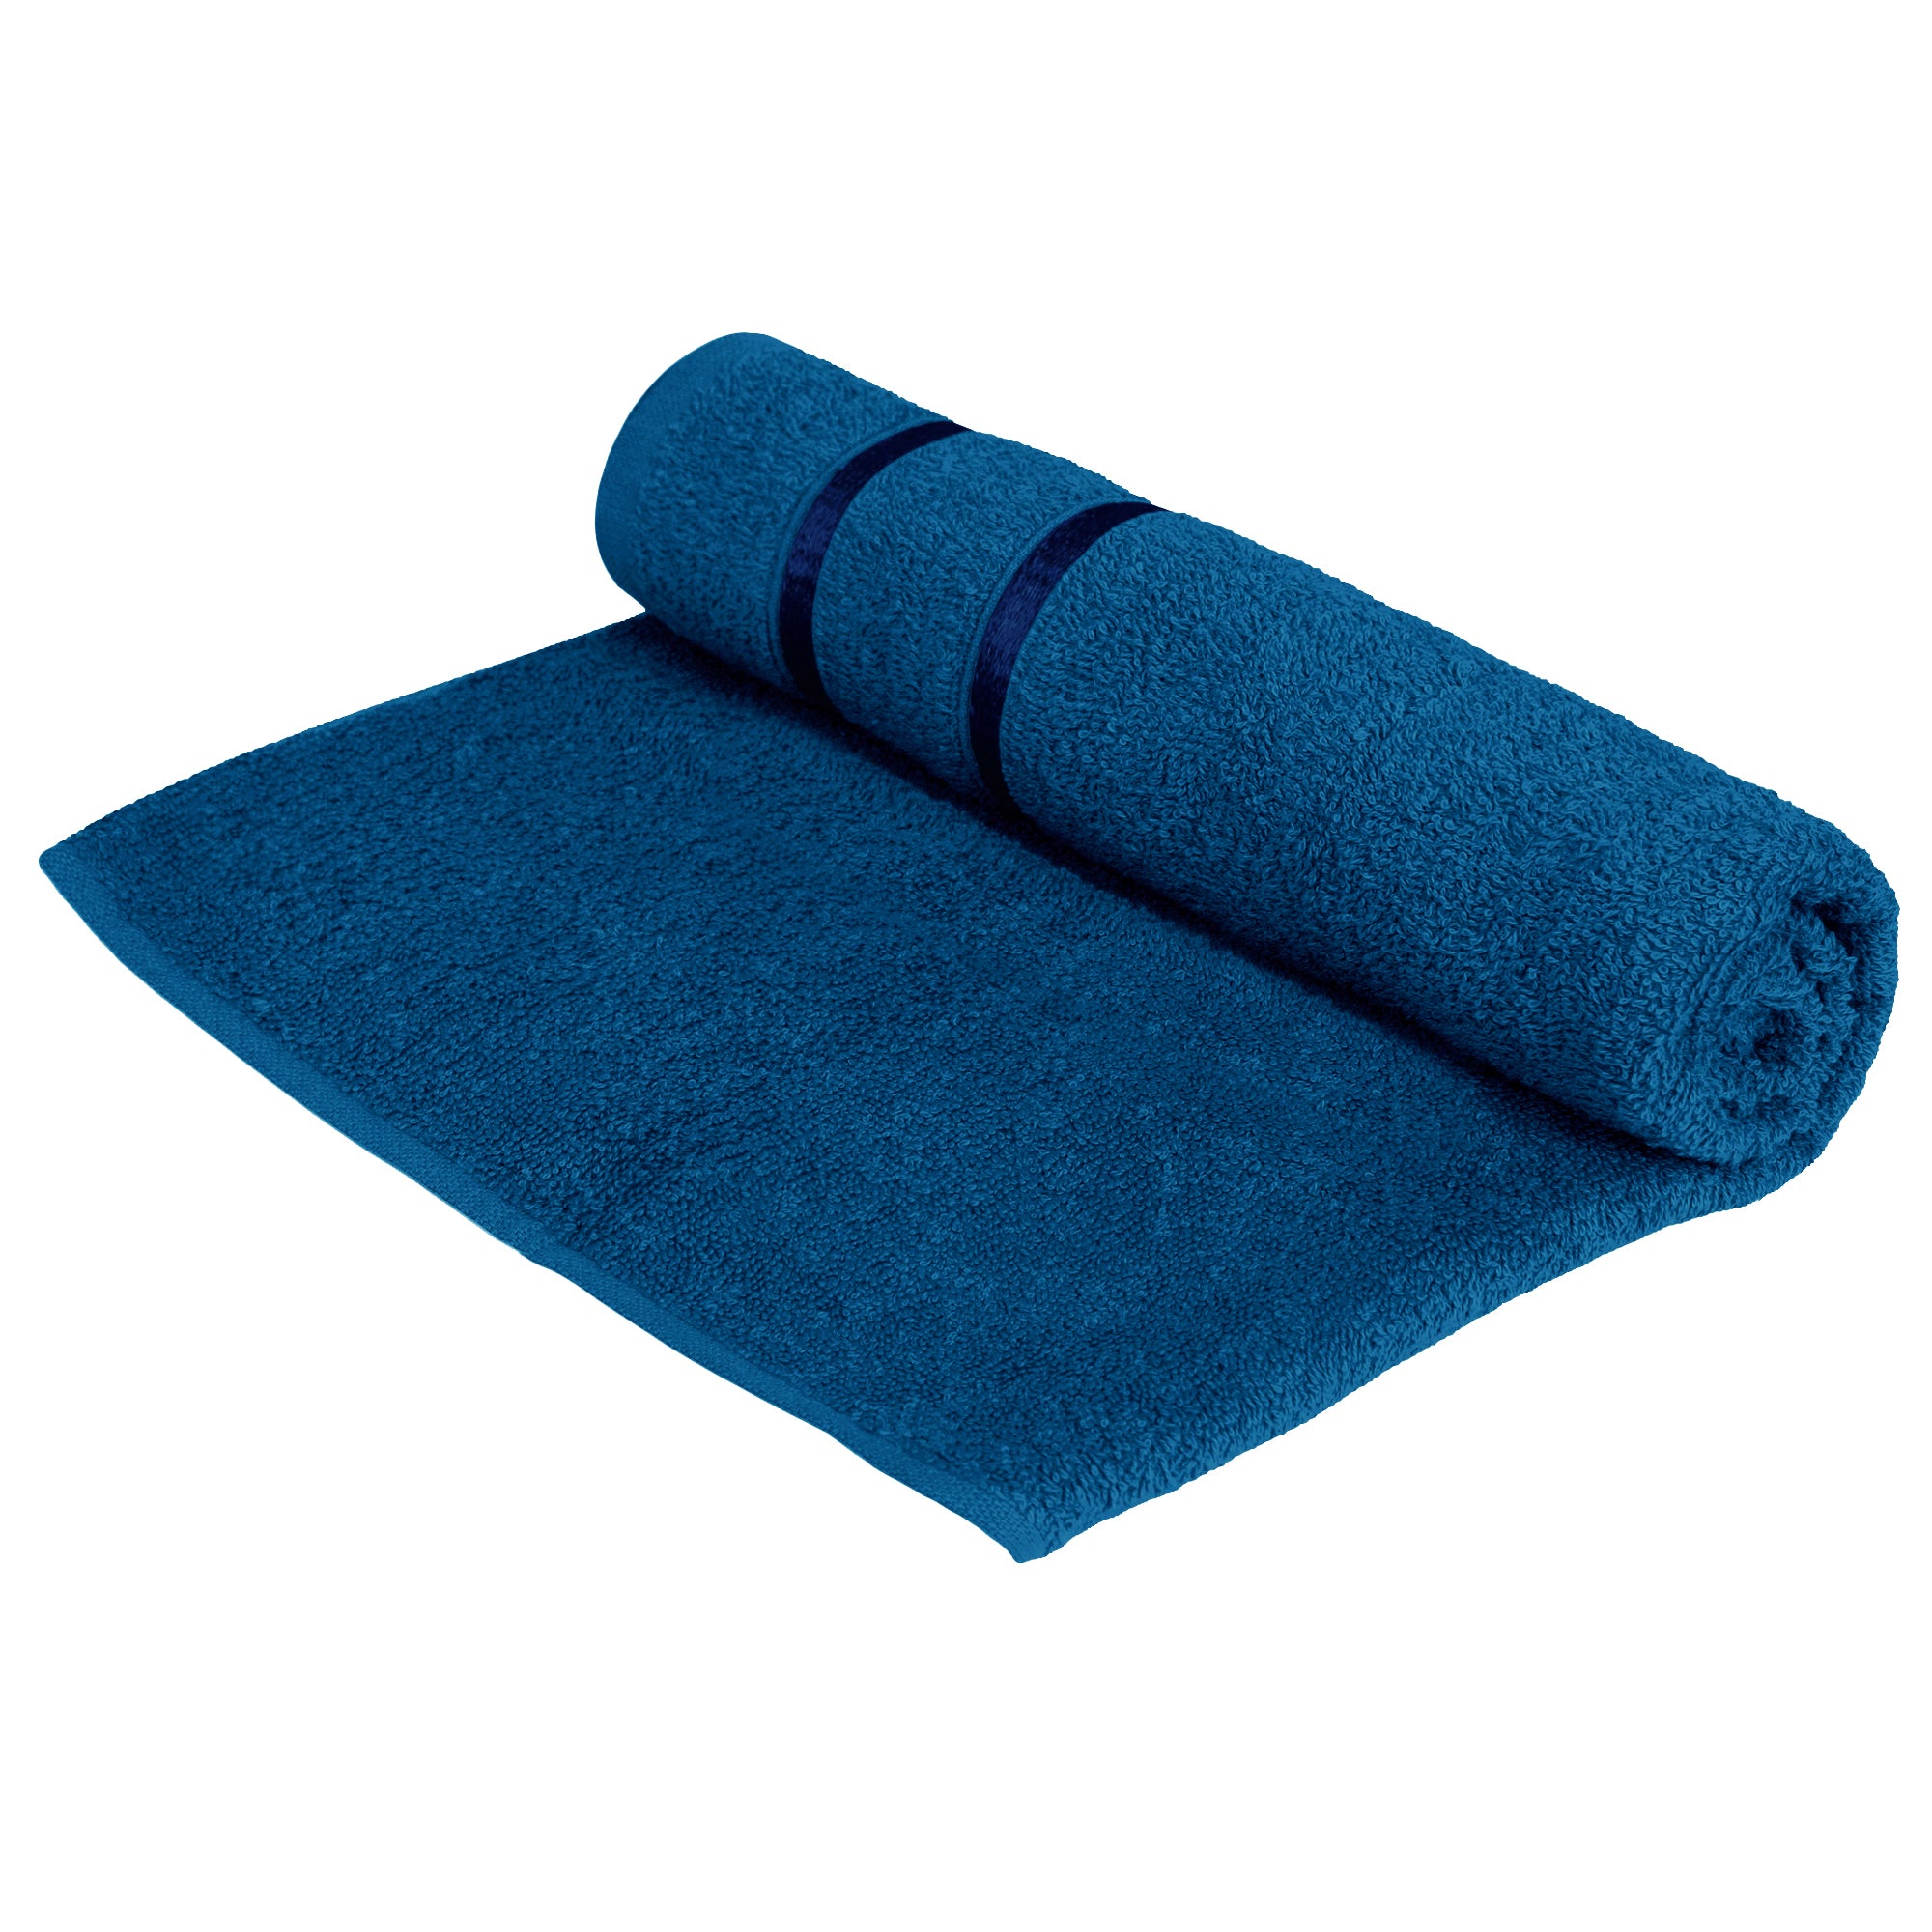 Story@Home 2 Units 100% Cotton Ladies Bath Towels - Green and Navy